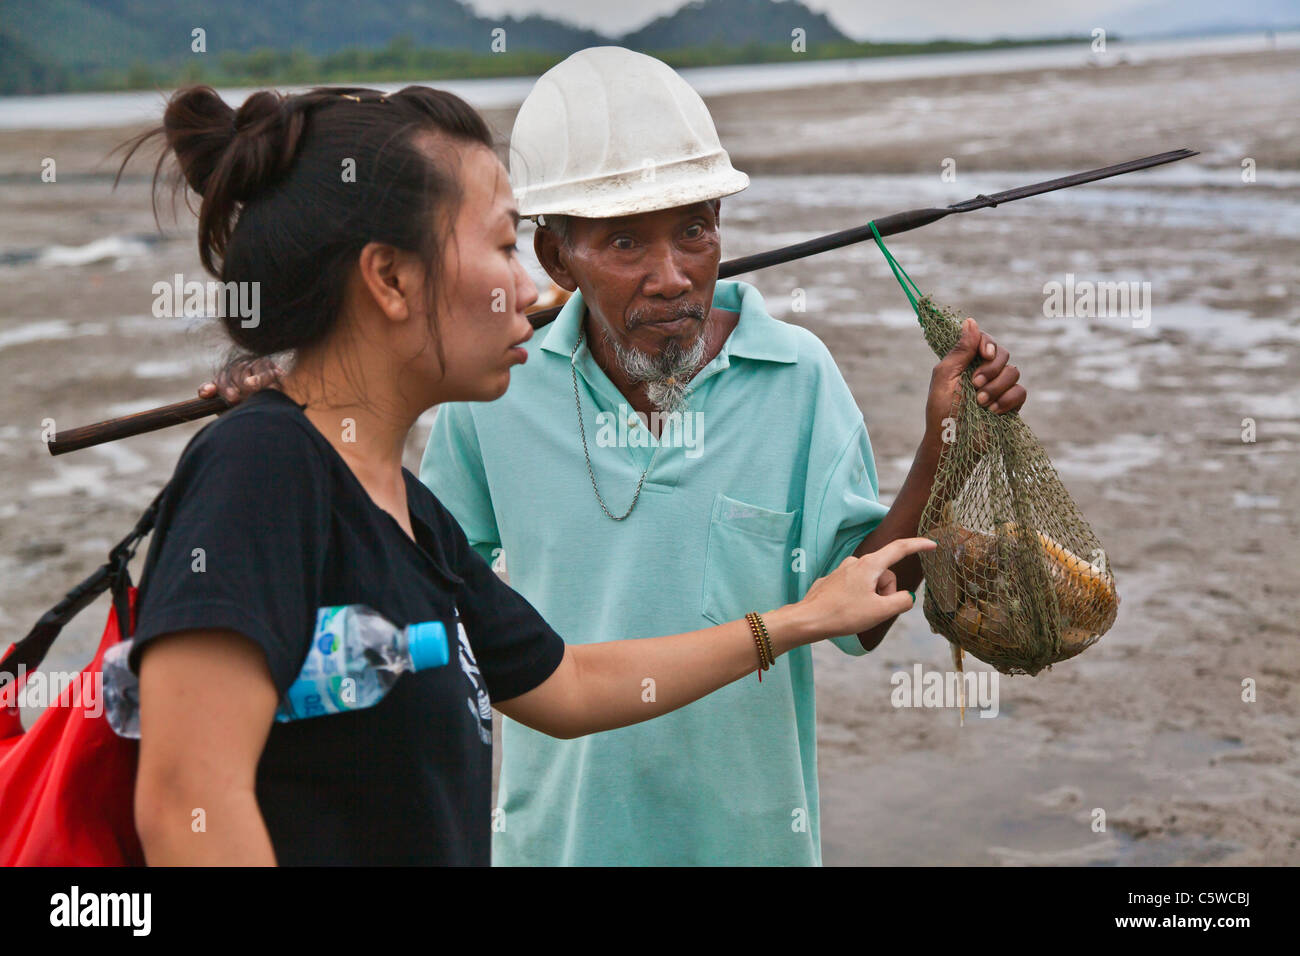 A local fisherman shows off his catch near the village of Ben Lion on KOH PHRA THONG ISLAND - THAILAND Stock Photo